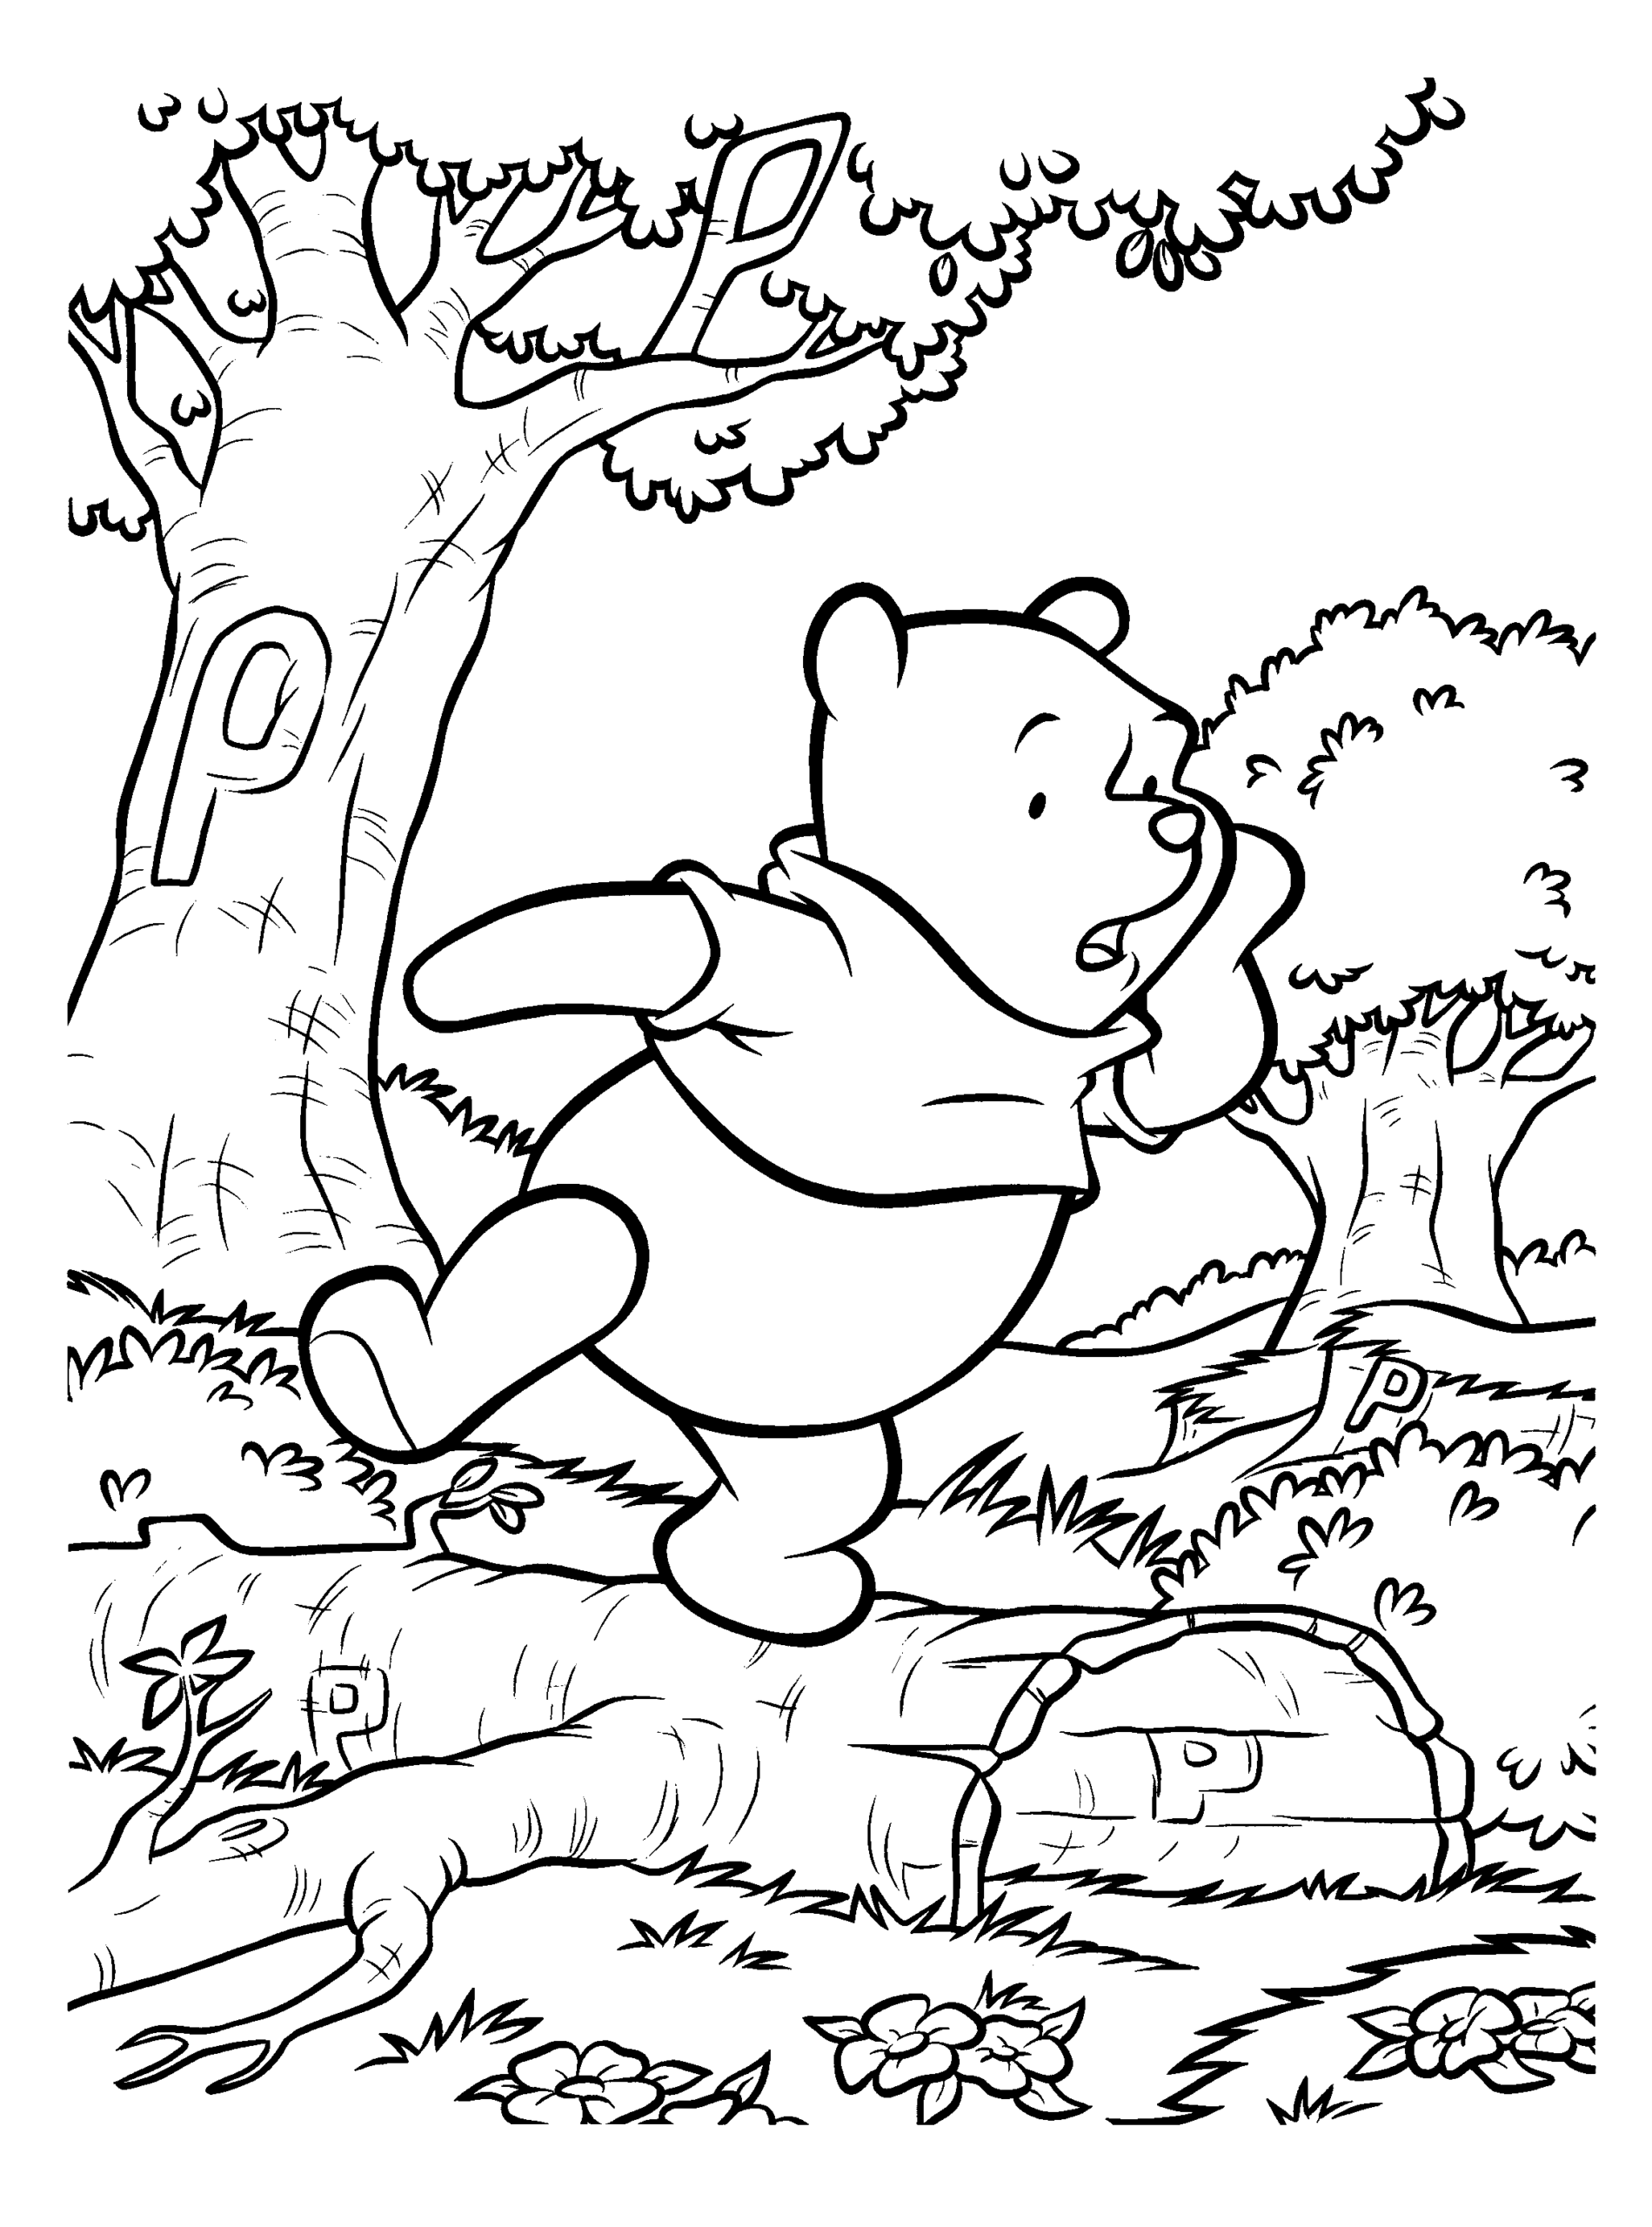 Winnie the Pooh Coloring Pages Cartoons winnie the pooh 17 Printable 2020 7110 Coloring4free